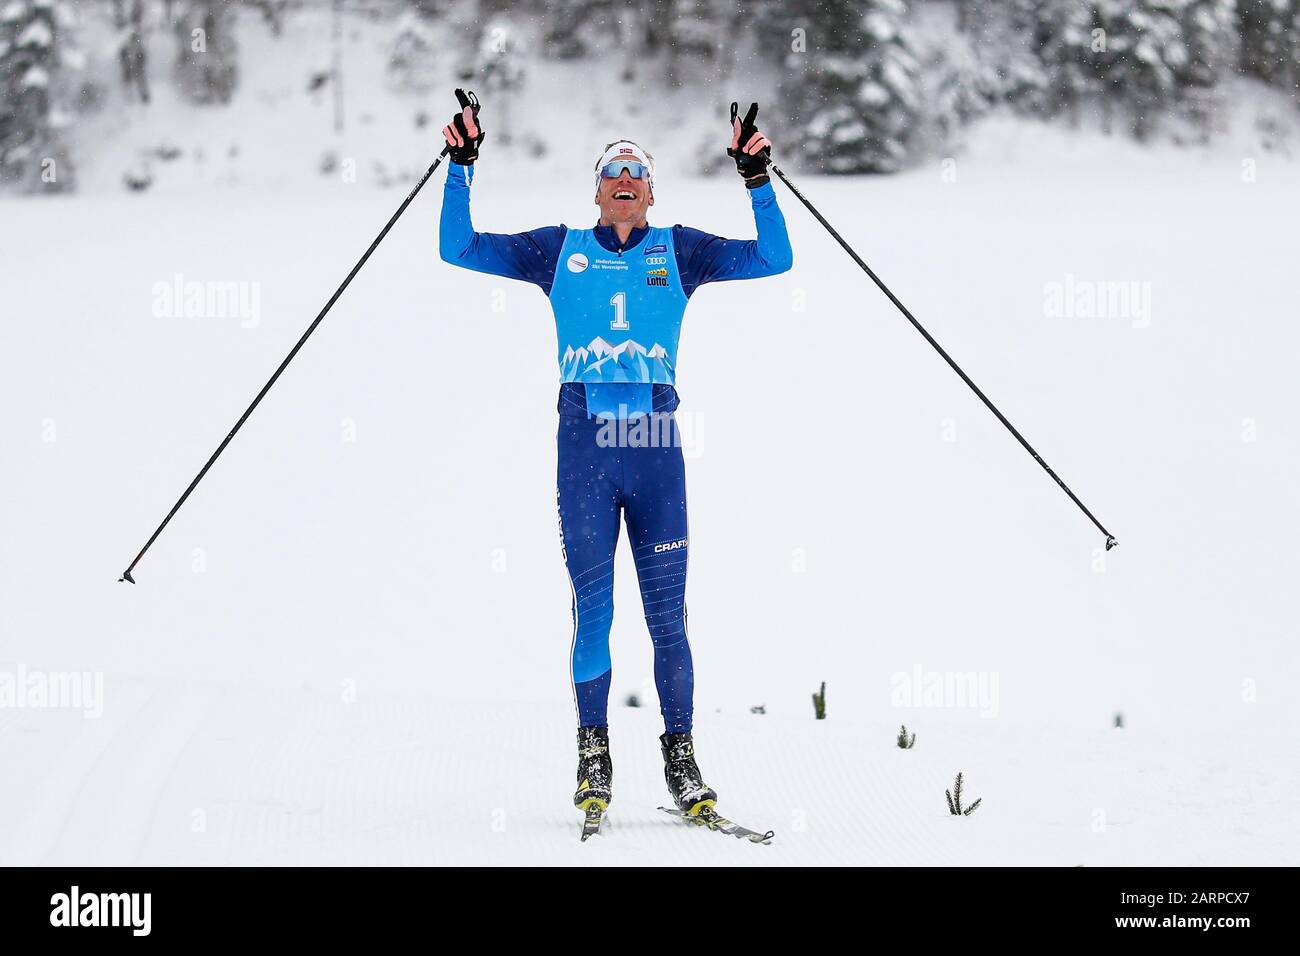 SANKT ULRICH AM PILLERSEE , 29-01-2020 , Rick Hoenderop wins the NK nordic ski freestyle 2020. Stock Photo